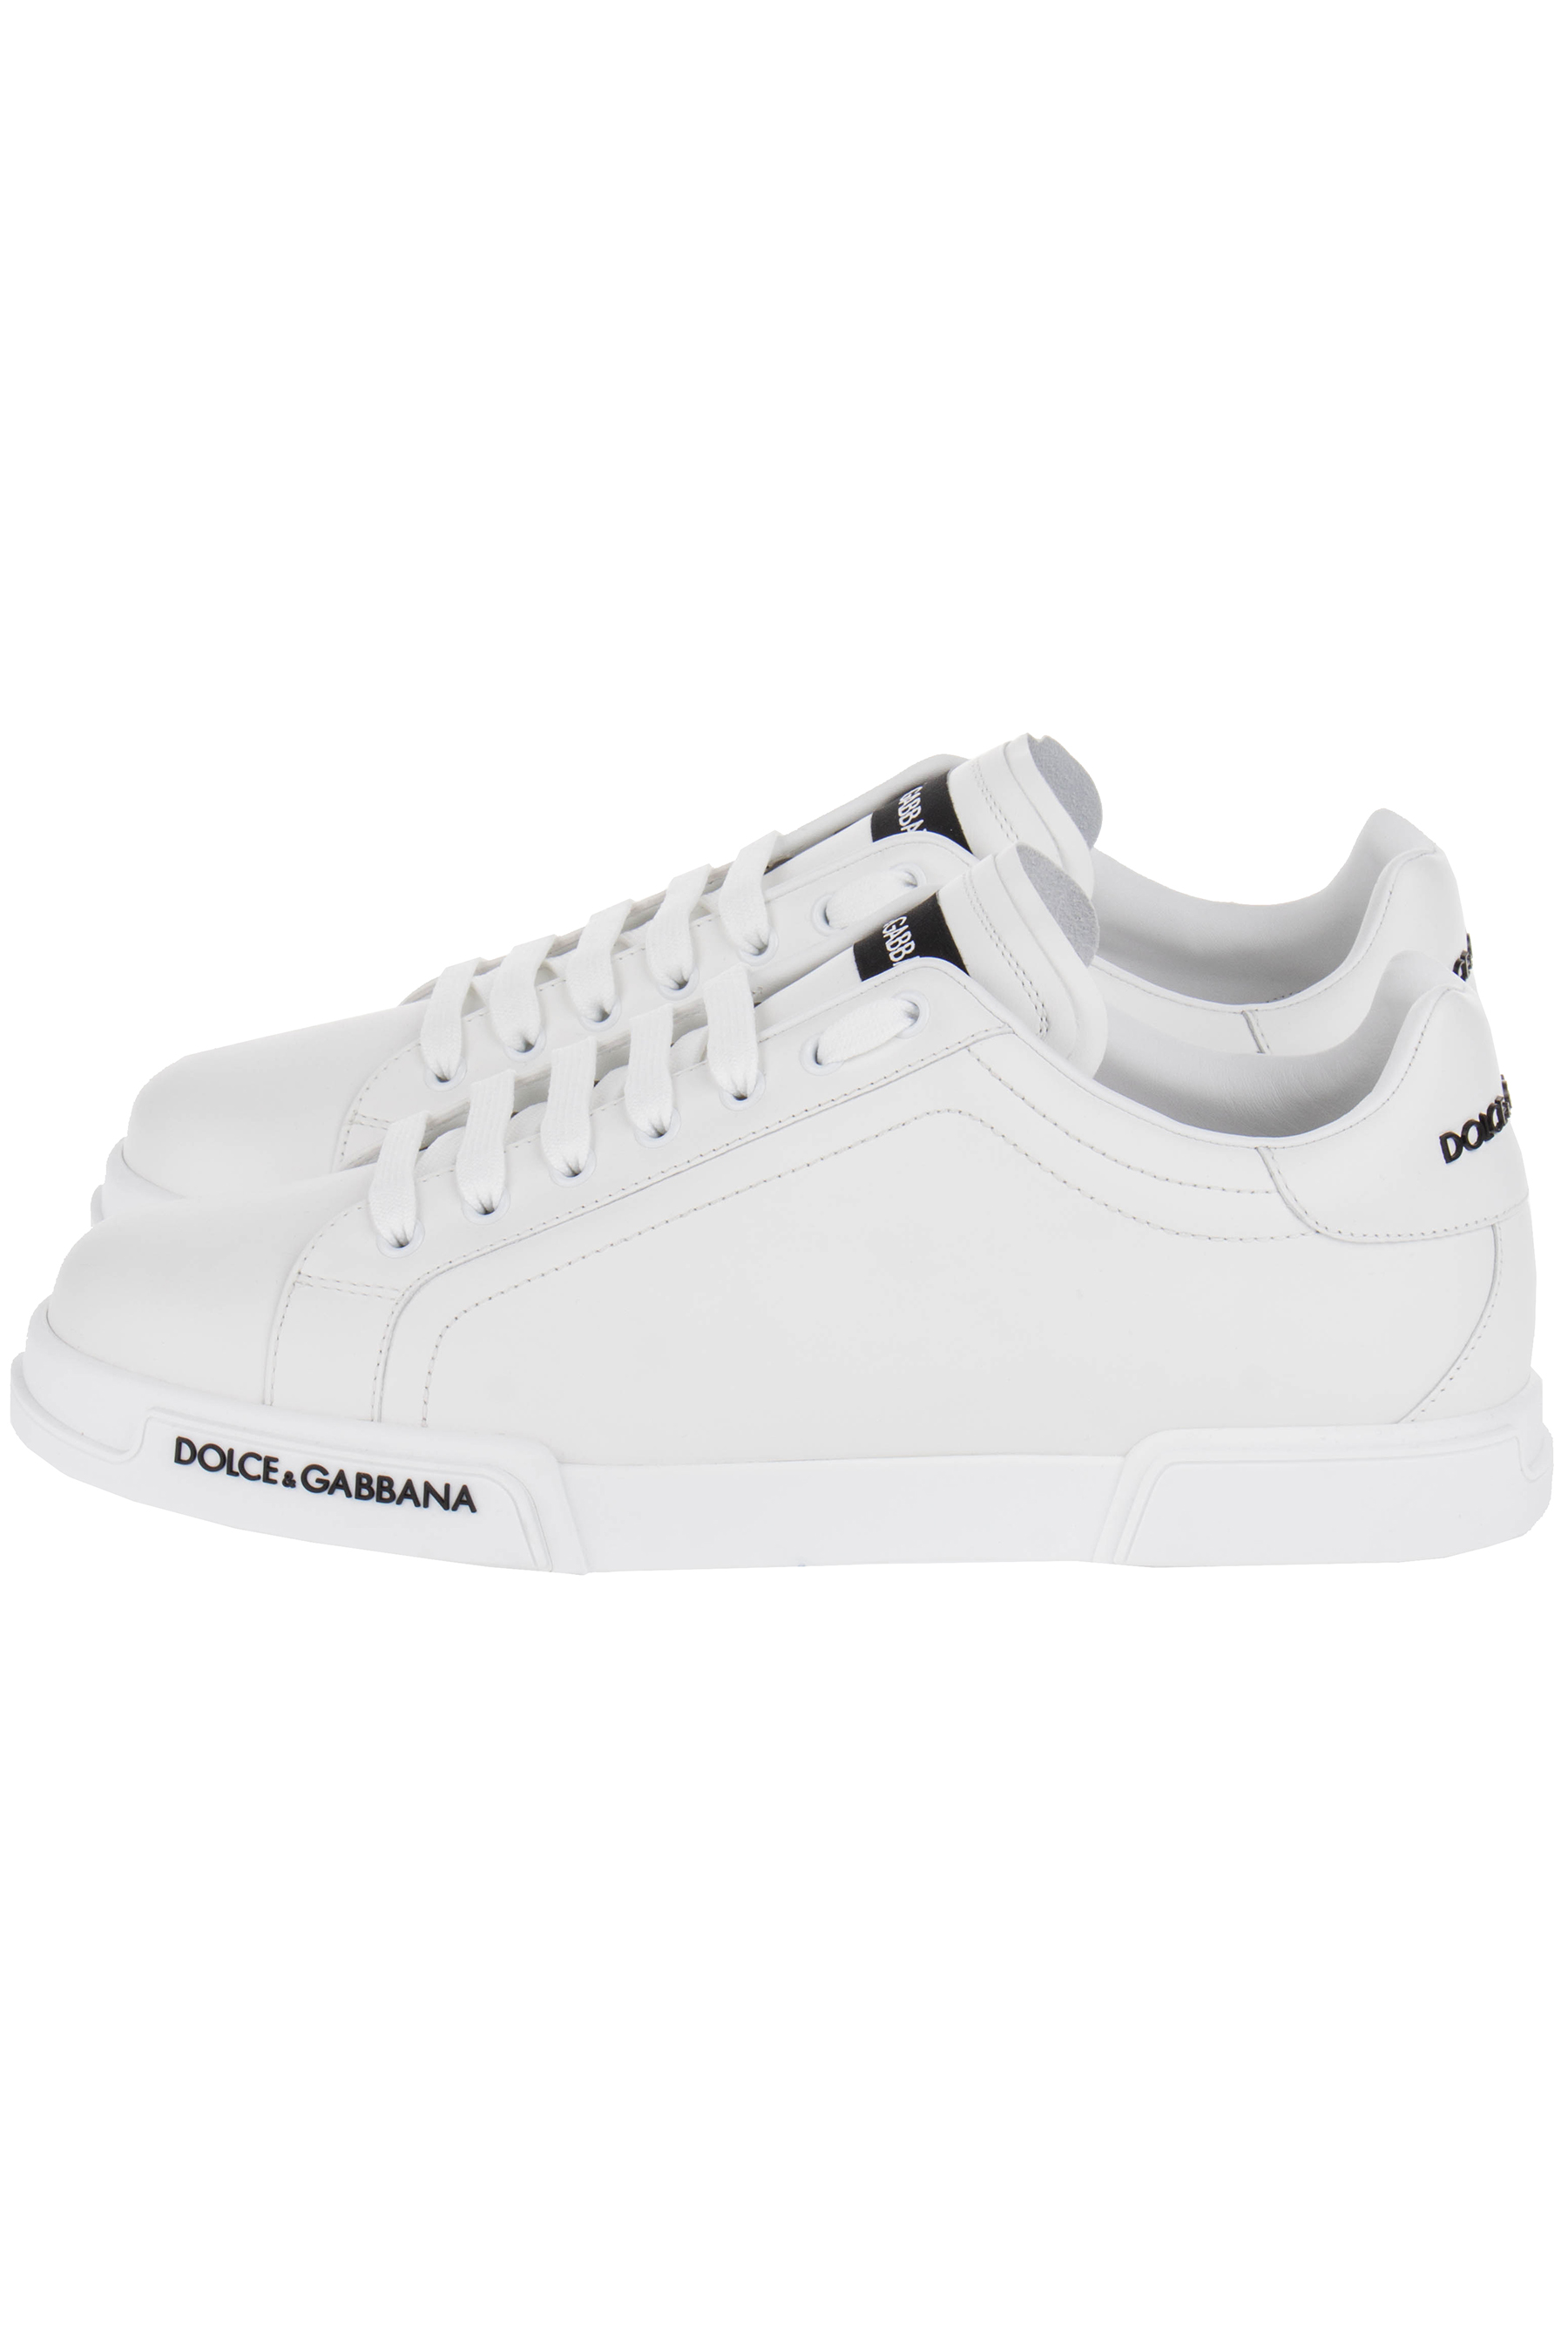 dolce and gabbana sneakers